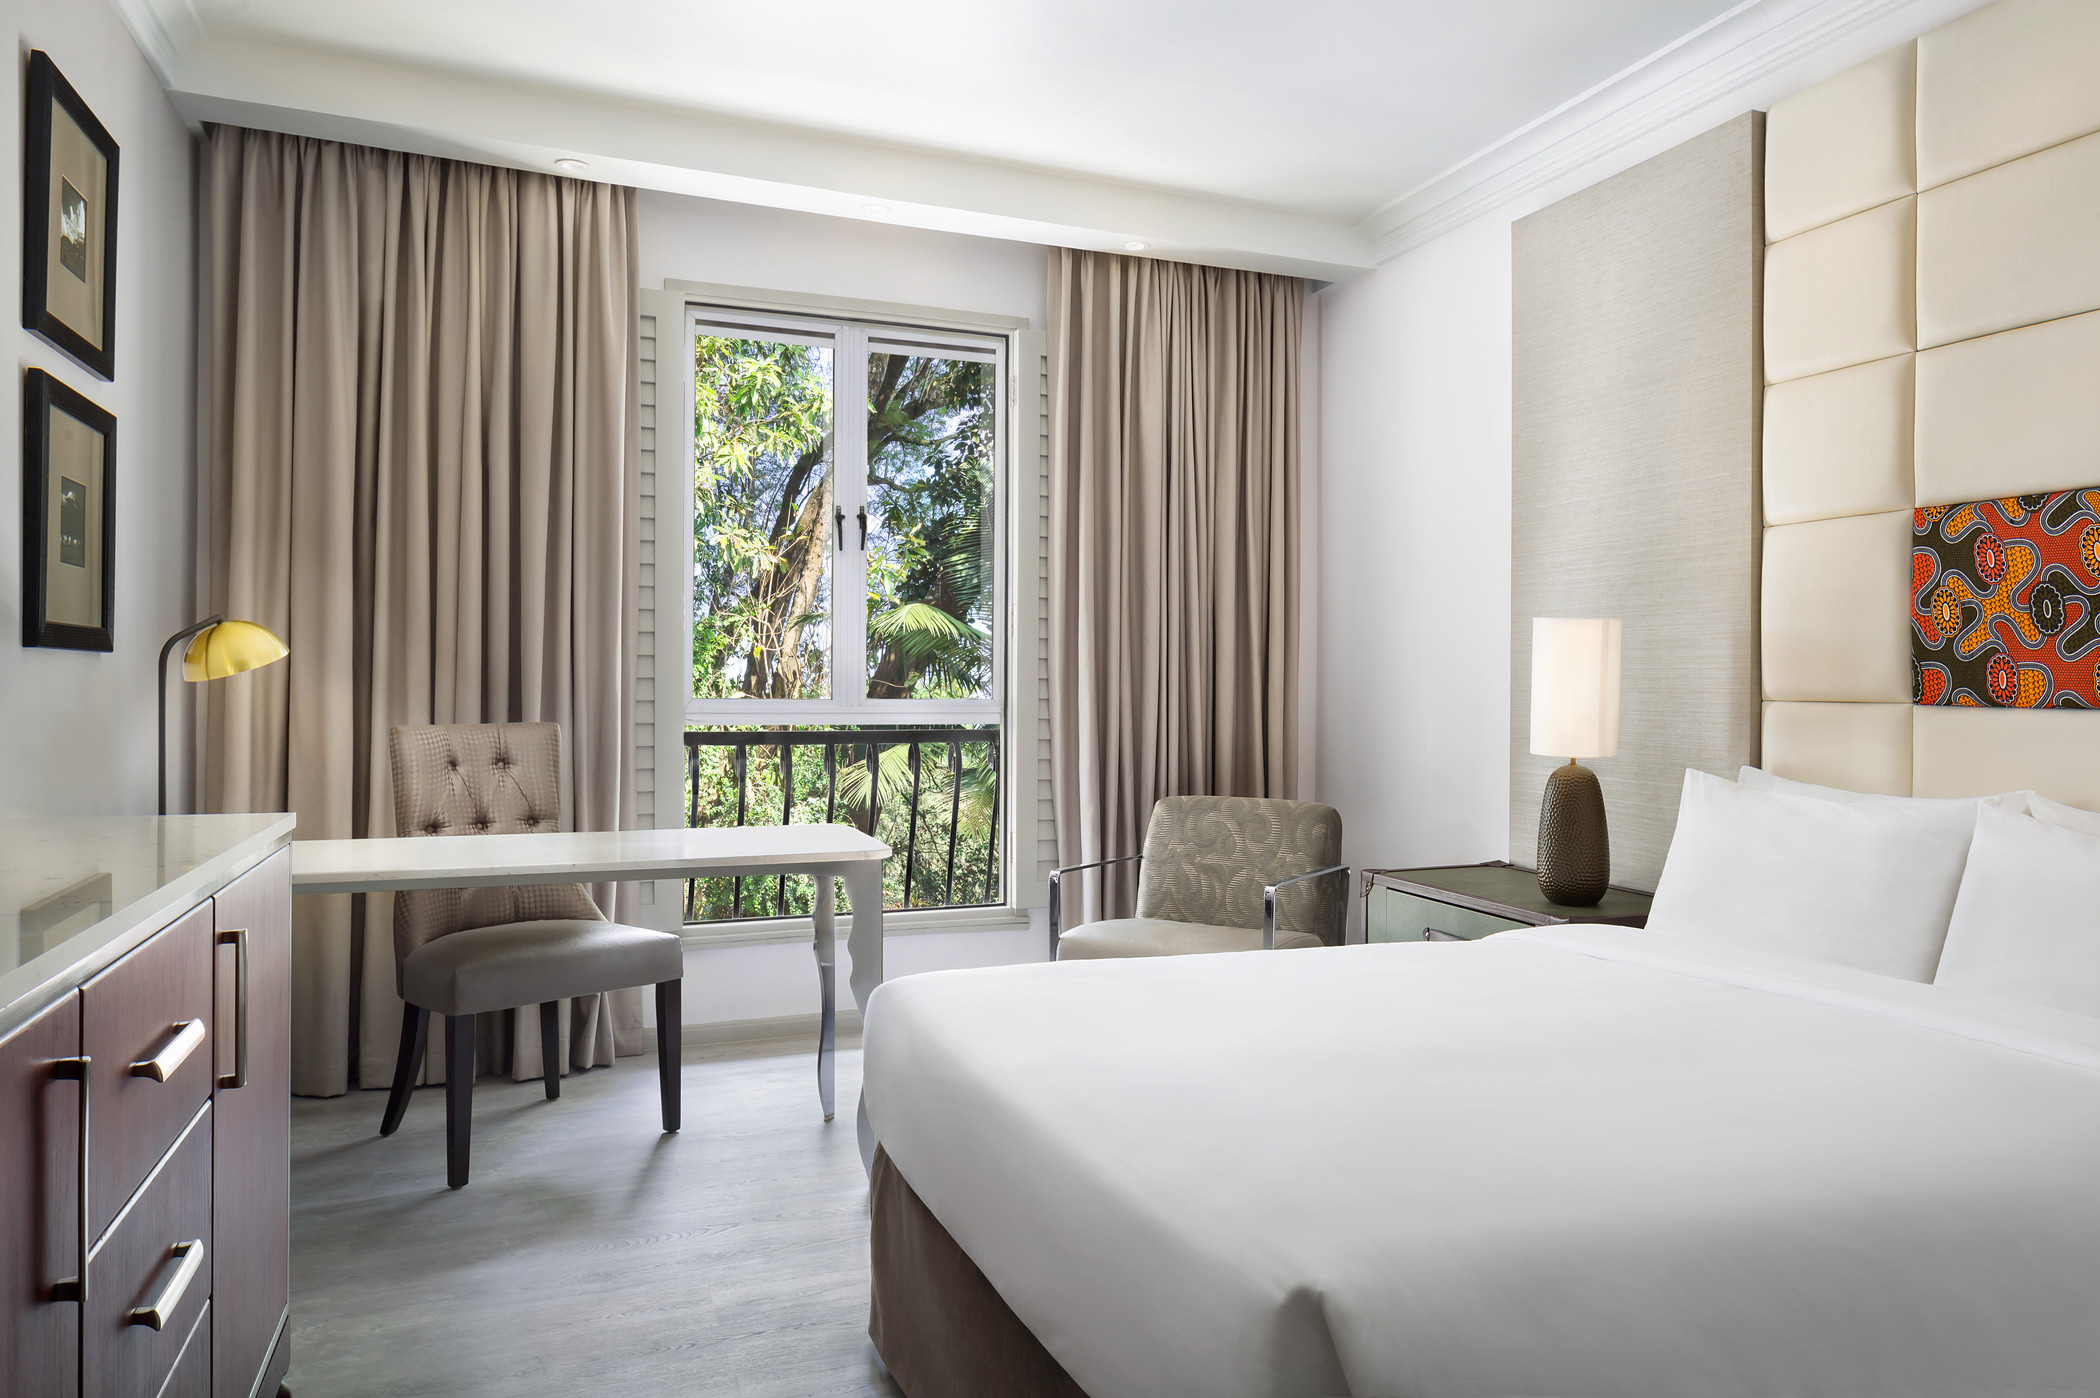 Marriott International has rebranded The Arusha Hotel under the Four Points brand following an extensive renovation 